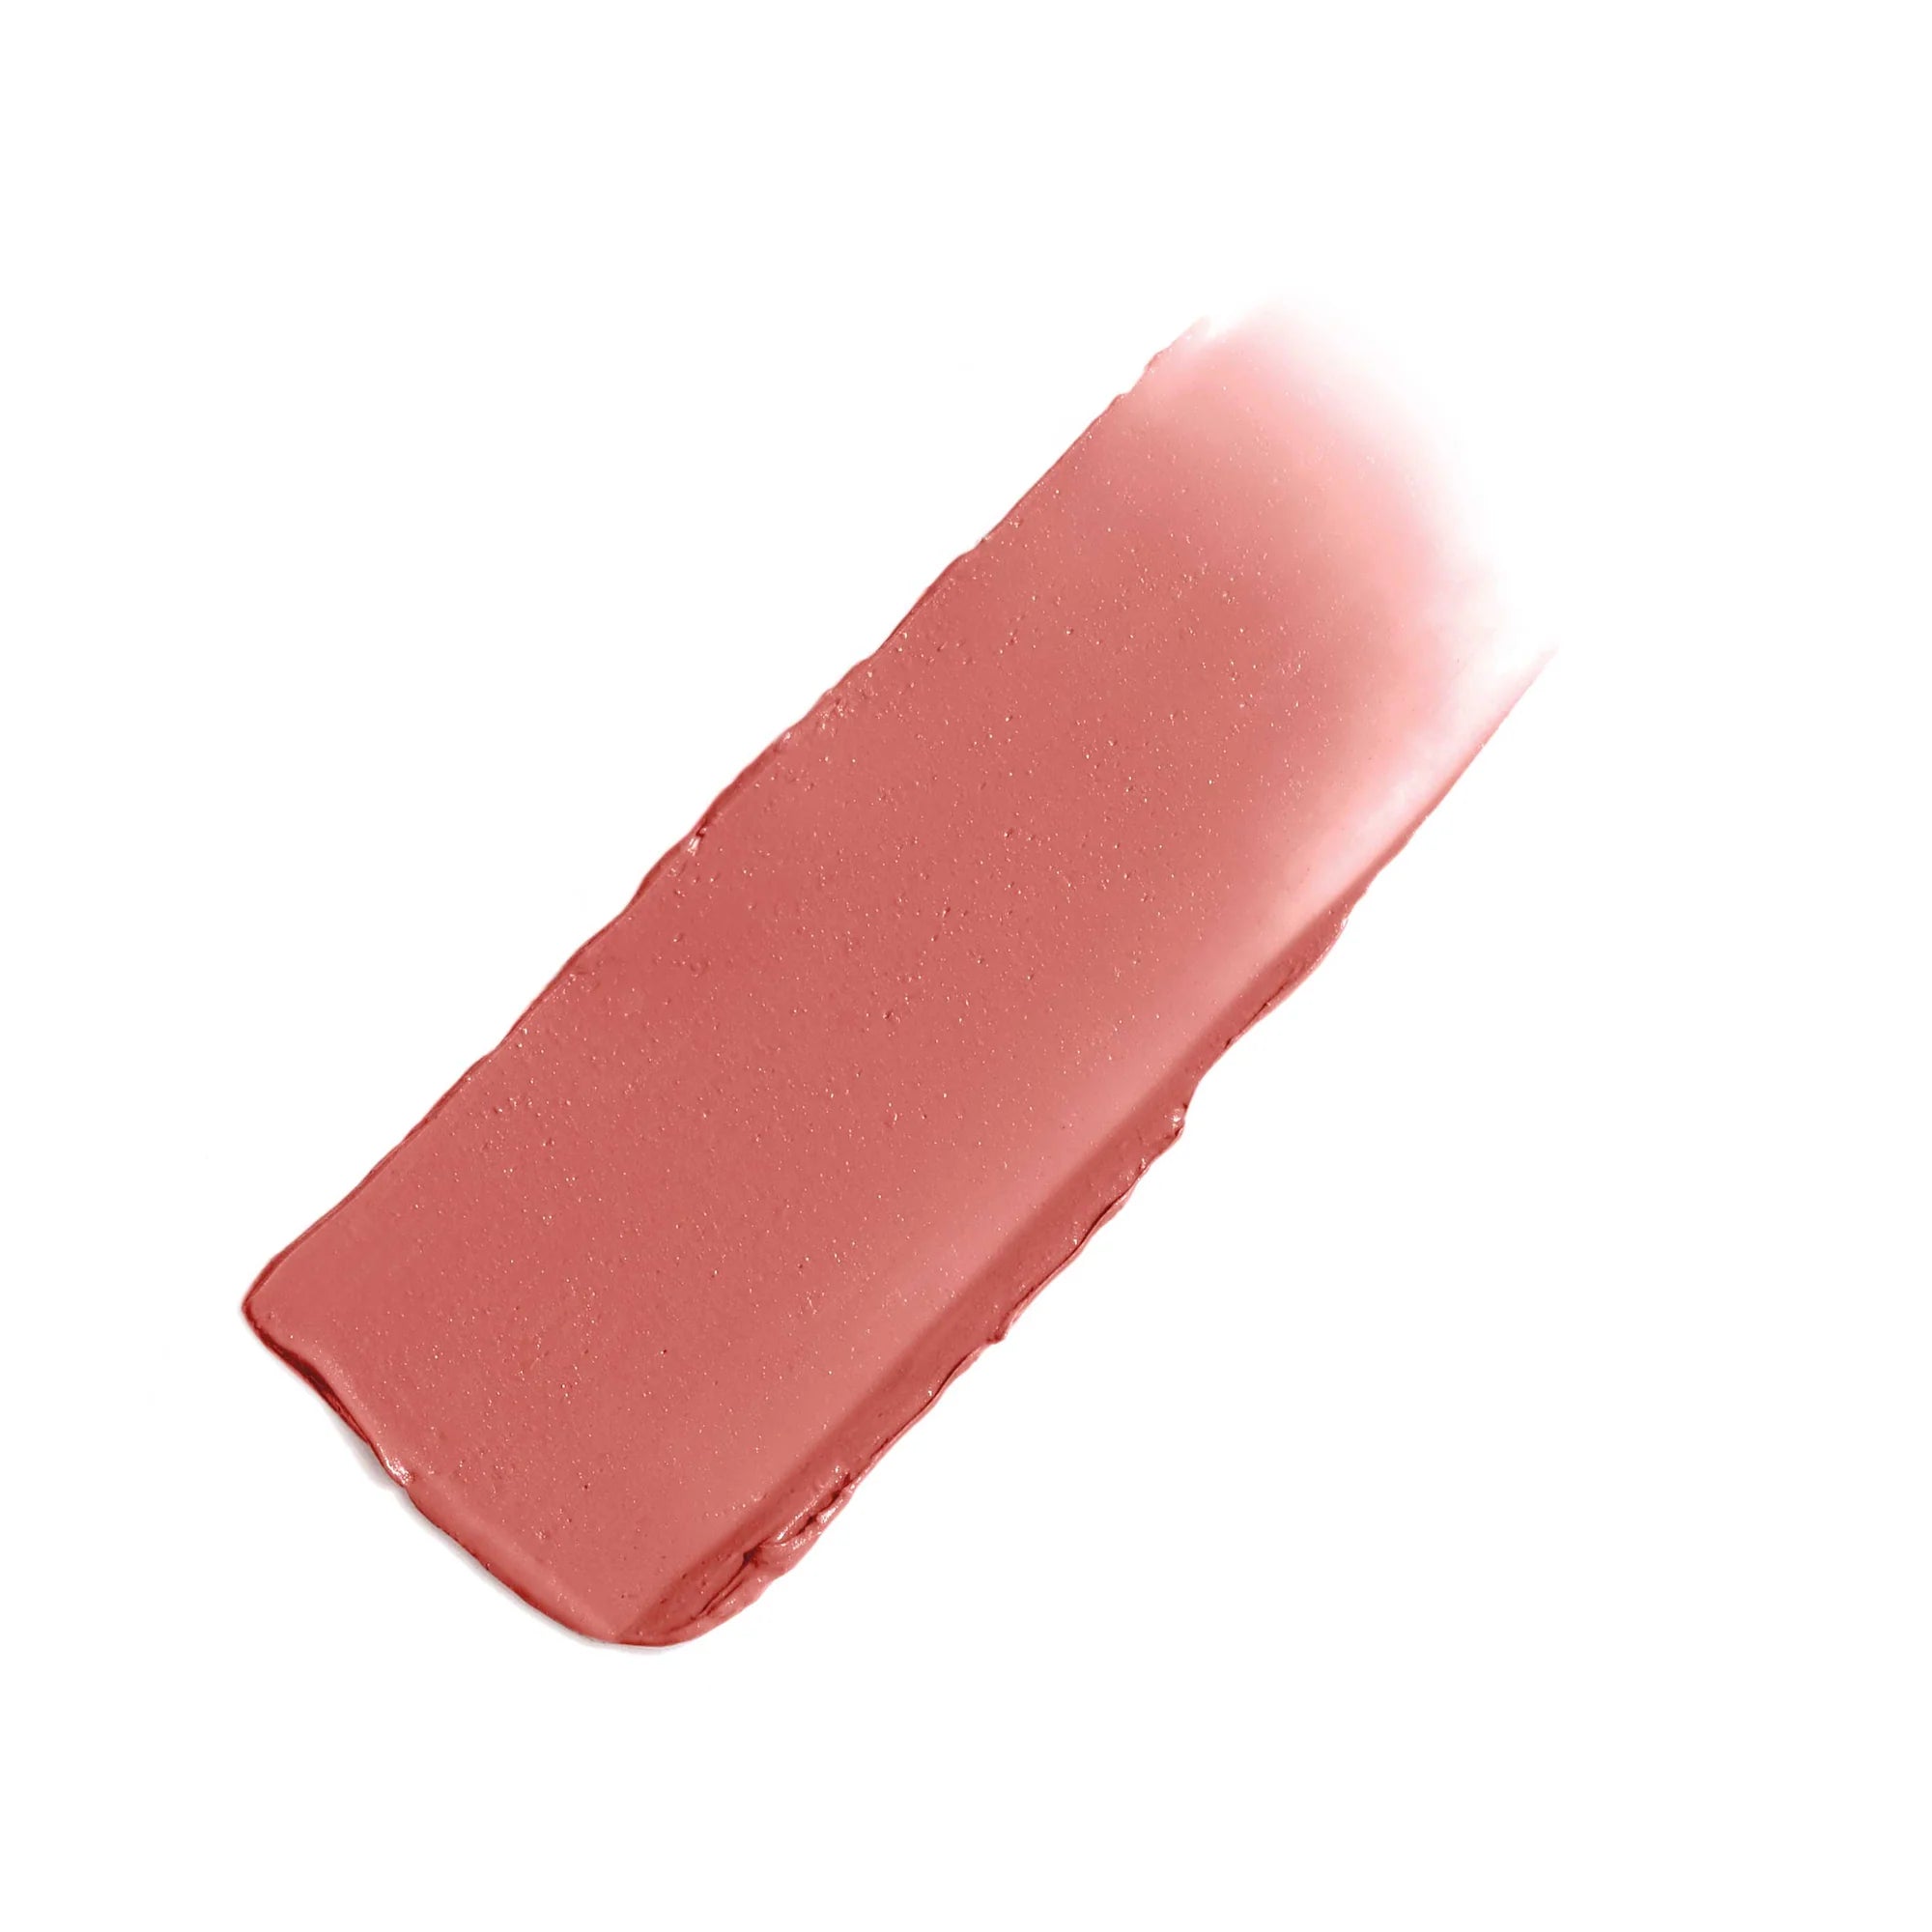 Jane Iredale's Glow Time Blush Stick - shade Balmy - berry rose with no-shimmer